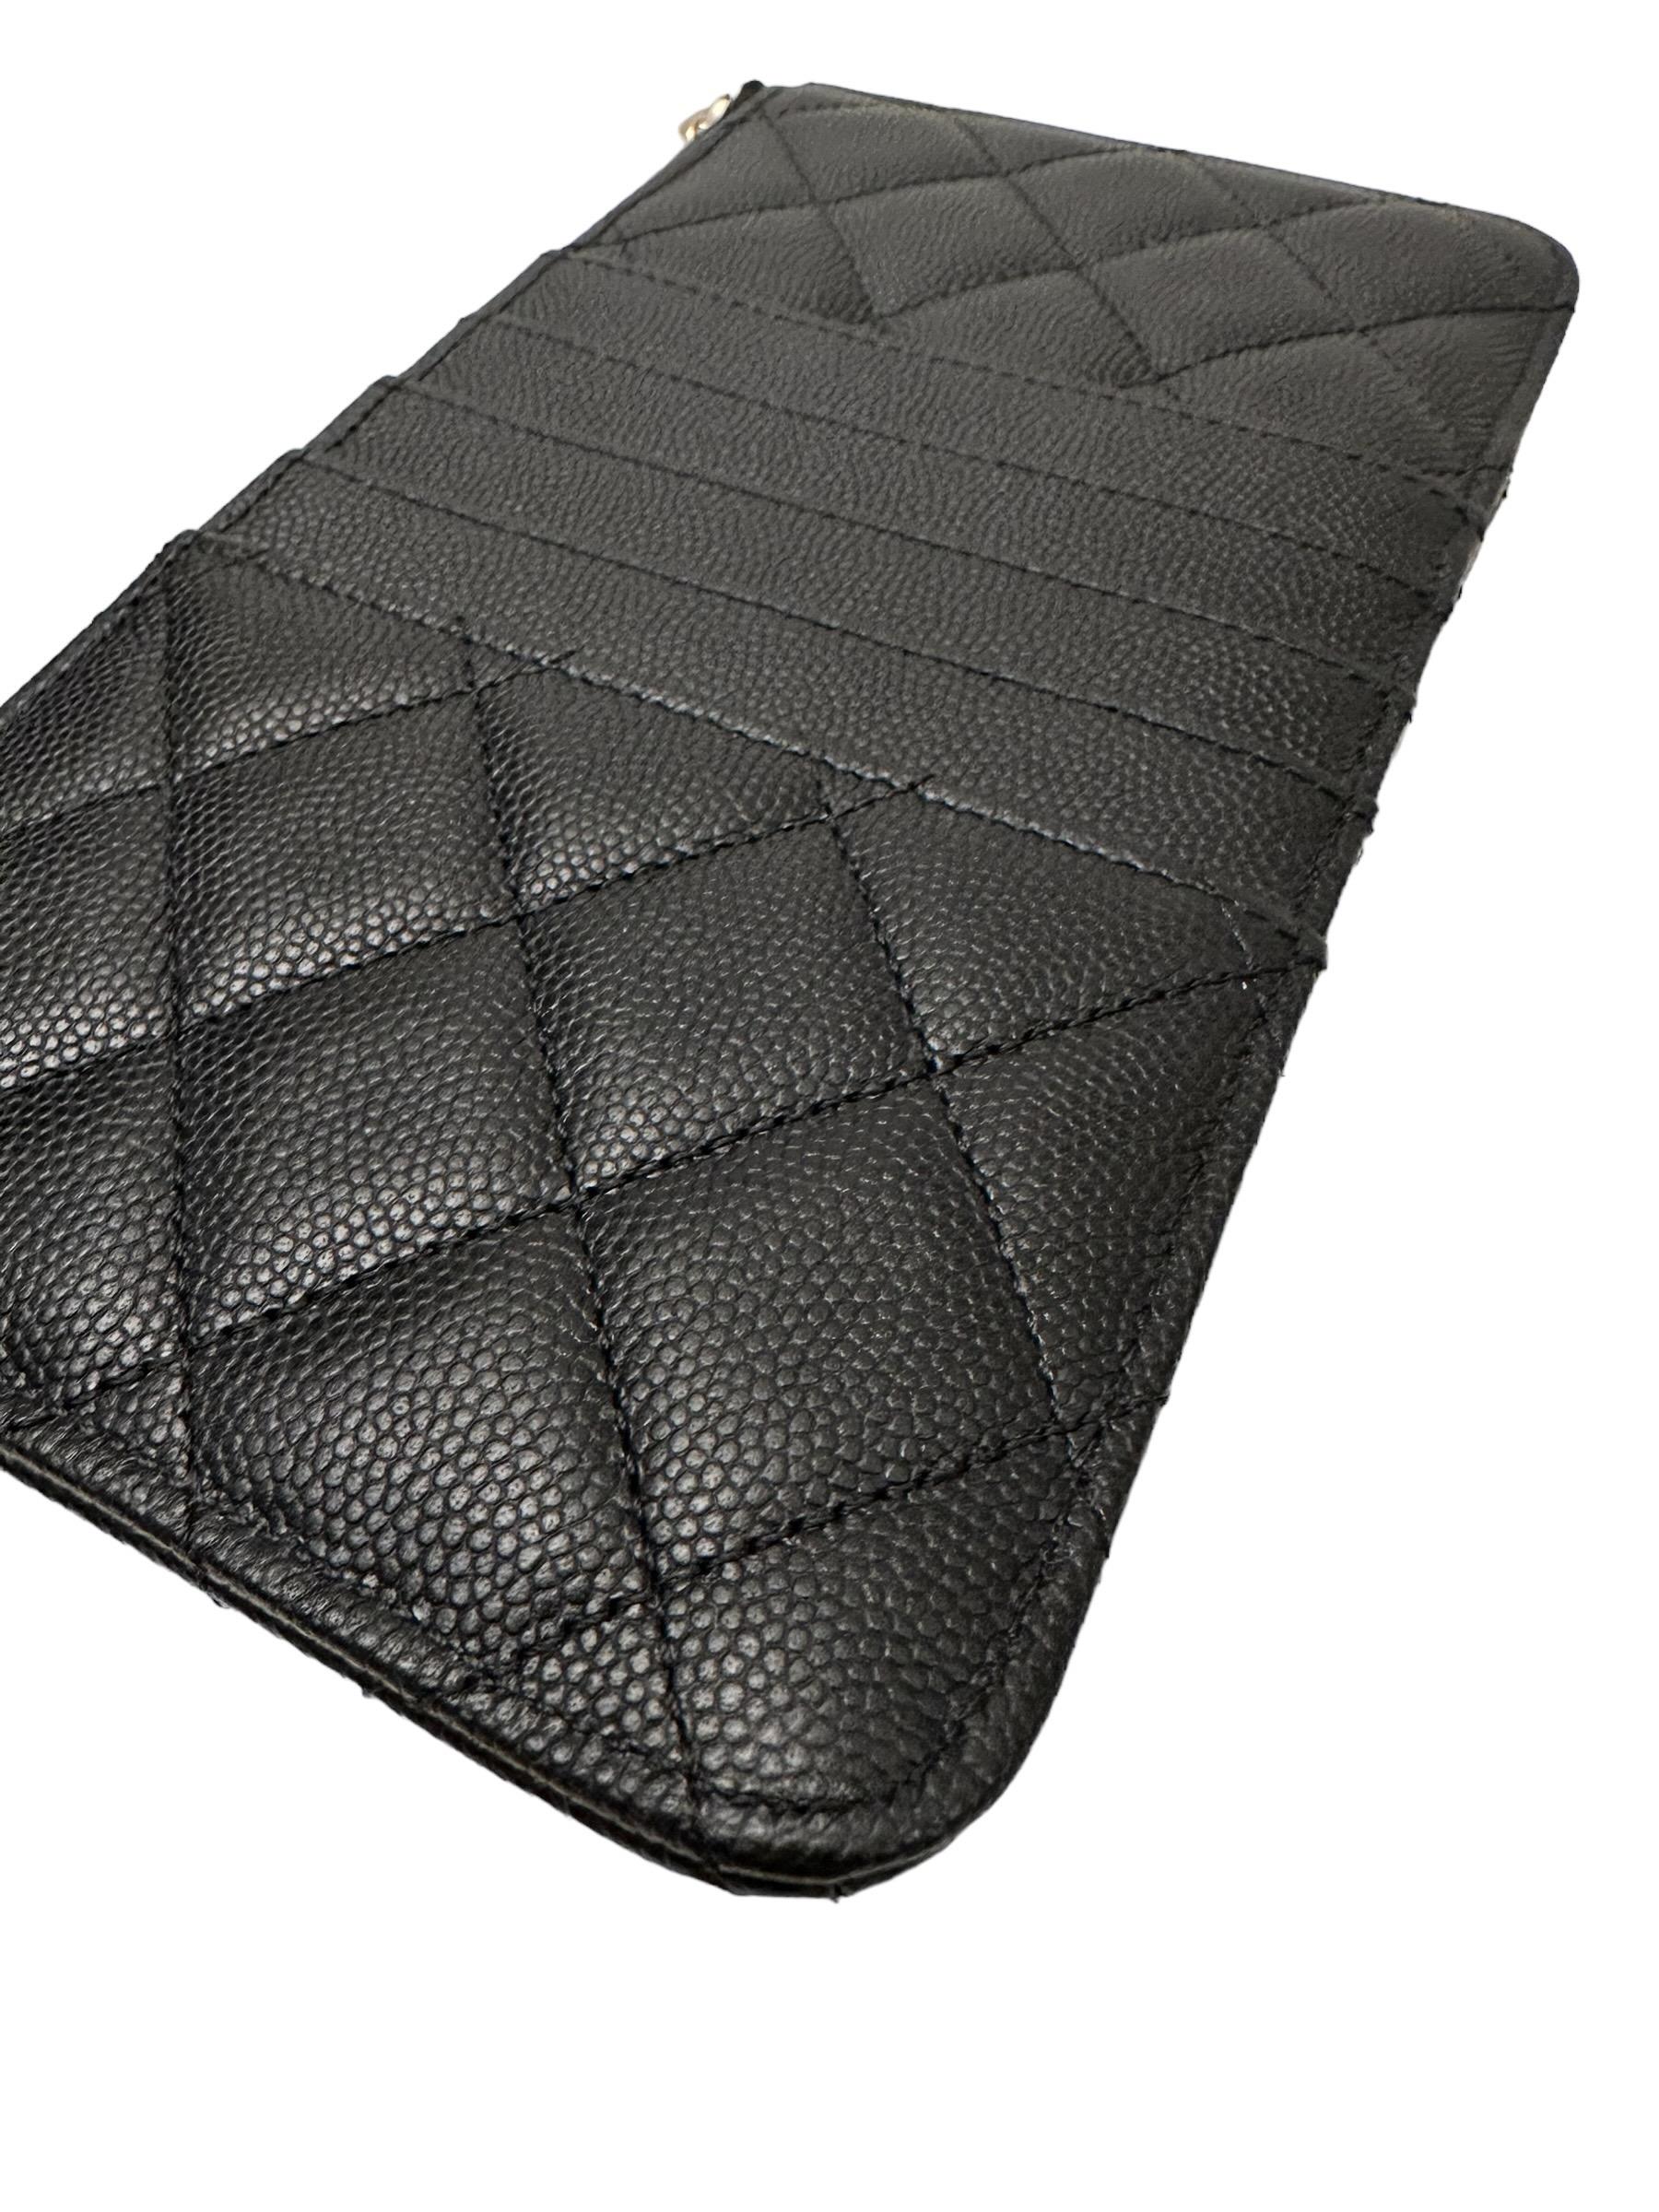 Women's or Men's Chanel Black Caviar Leather Diamond Quilted Flat Wallet